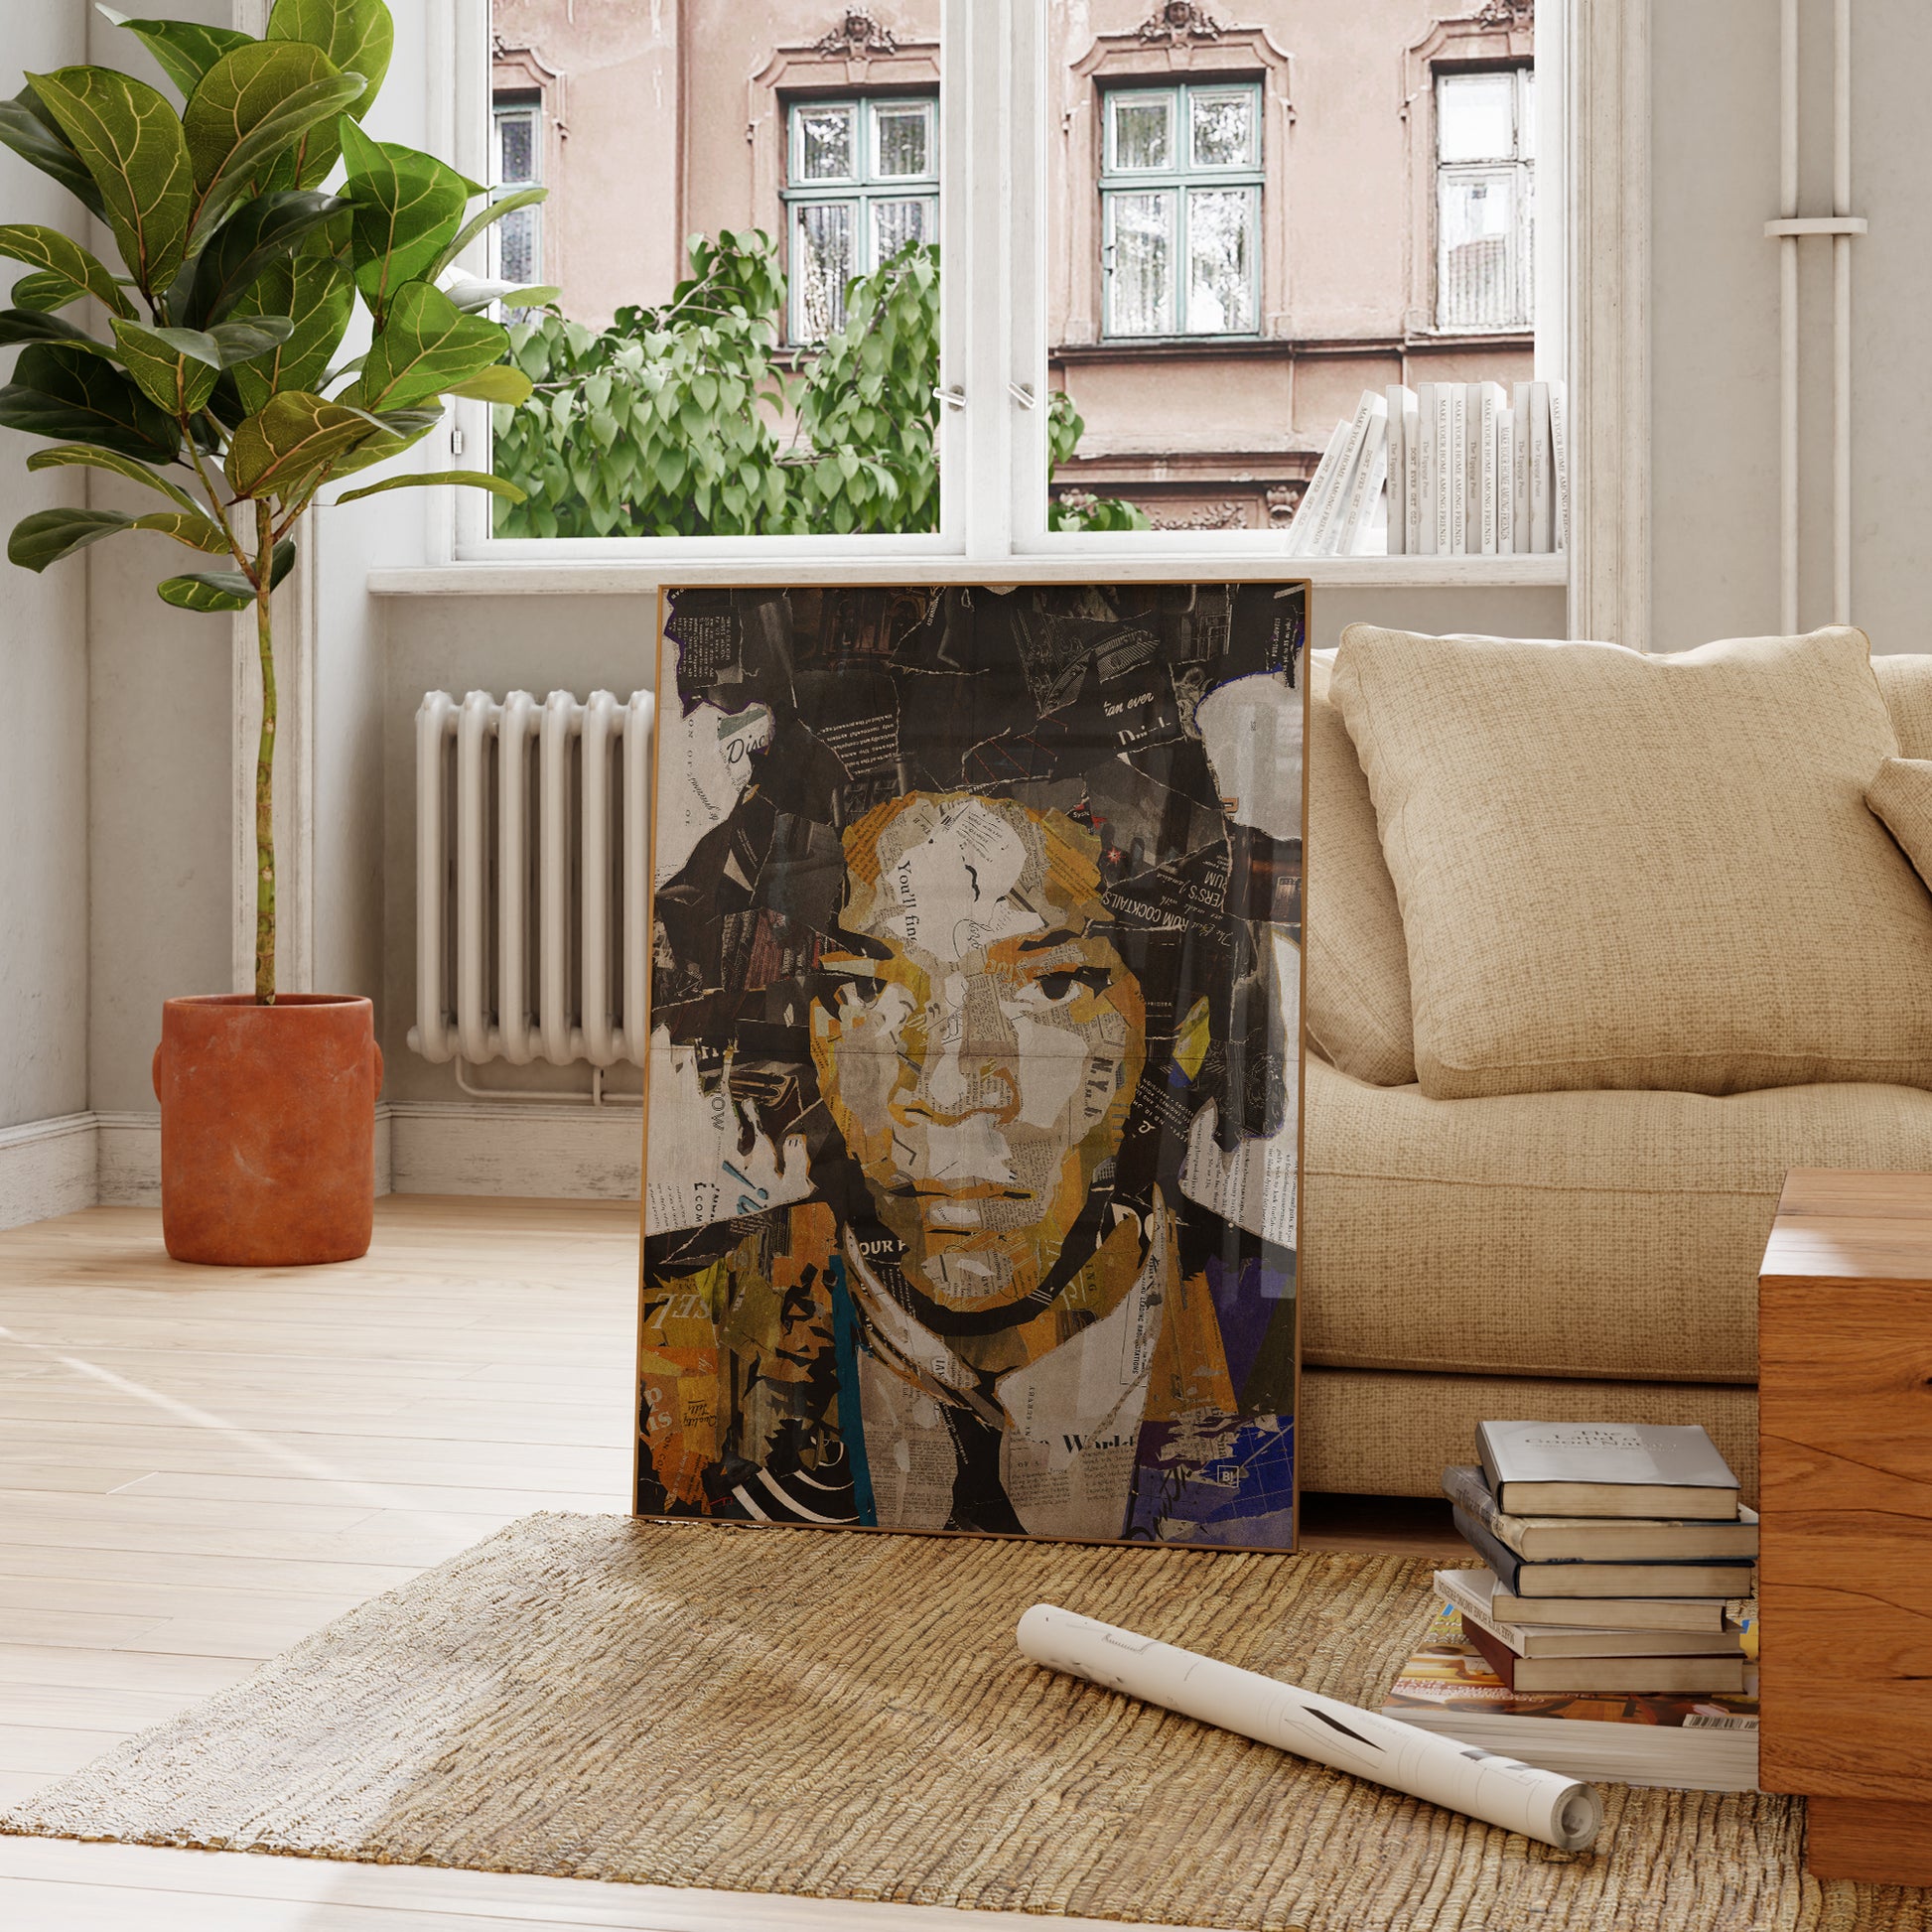 Be inspired by our iconic collage portrait art print of Jean-Michel Basquiat. This artwork was printed using the giclée process on archival acid-free paper and is presented in a French living room, capturing its timeless beauty in every detail.